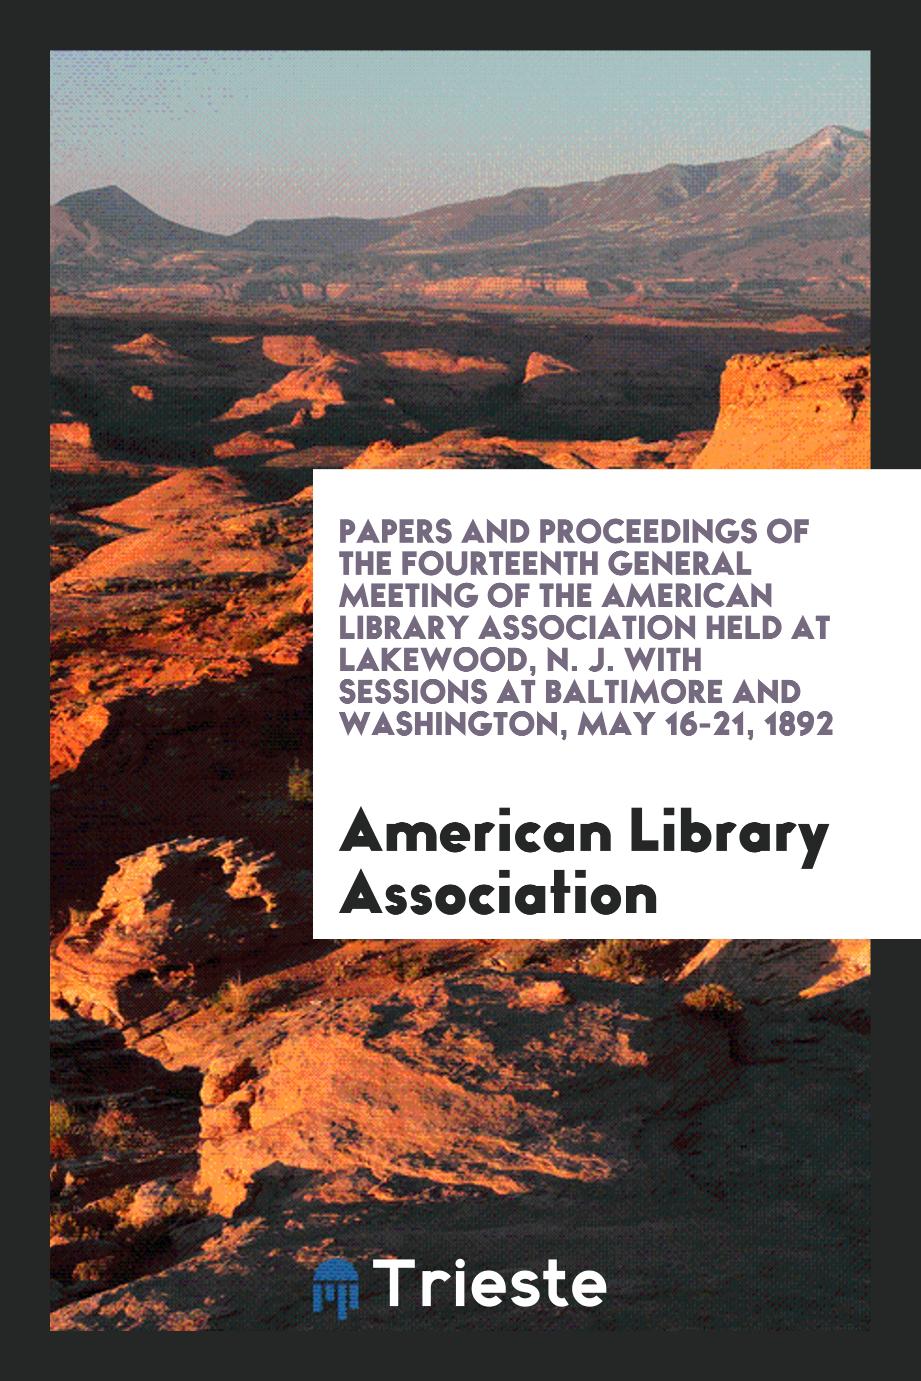 Papers and Proceedings of the Fourteenth General Meeting of the American Library Association Held at Lakewood, N. J. With Sessions at Baltimore and Washington, May 16-21, 1892